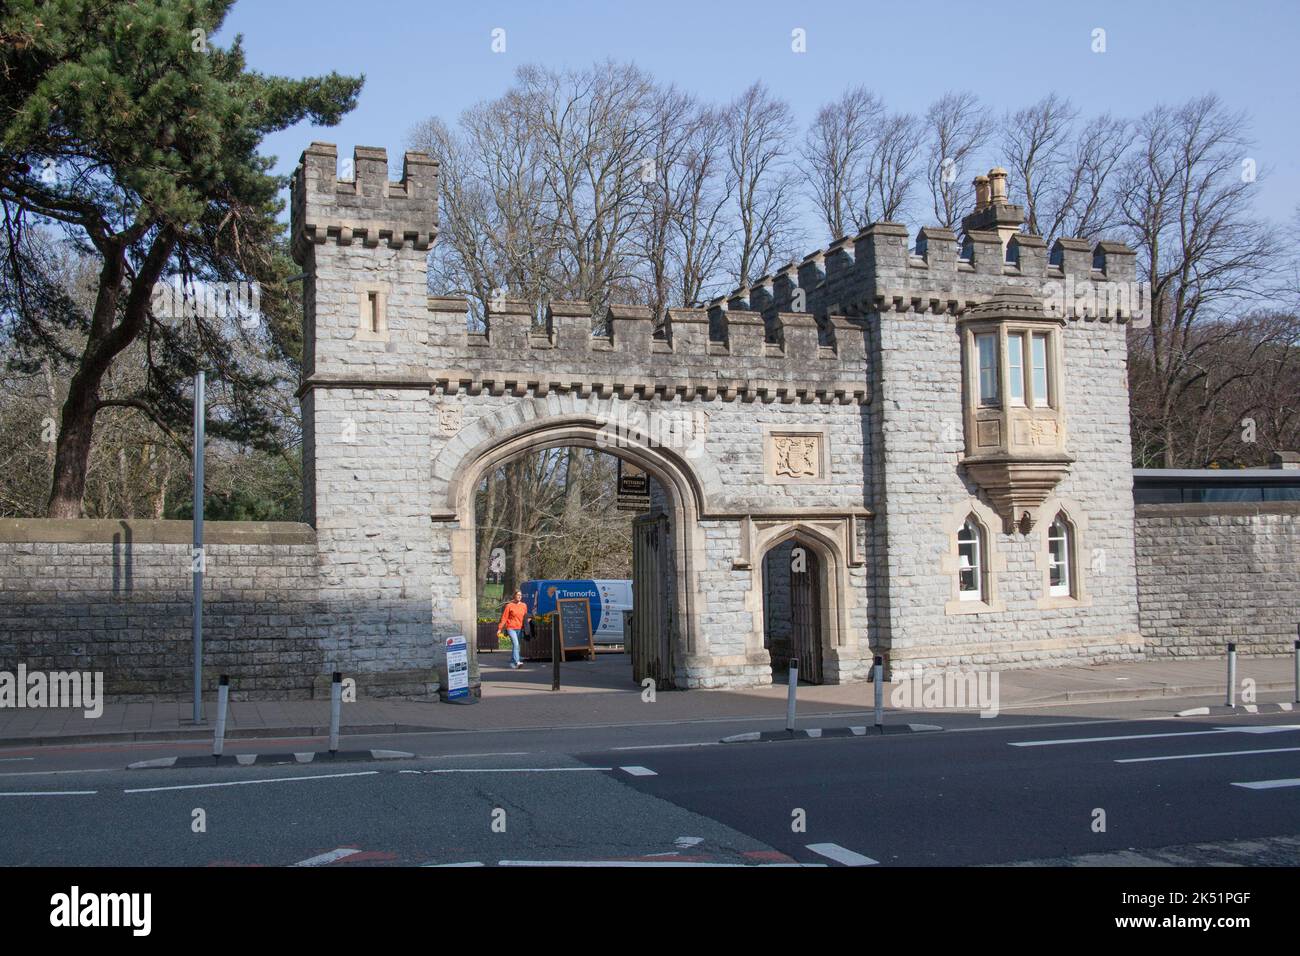 Castle Street and the entrance to Bute Park in Cardiff, Wales in the UK Stock Photo